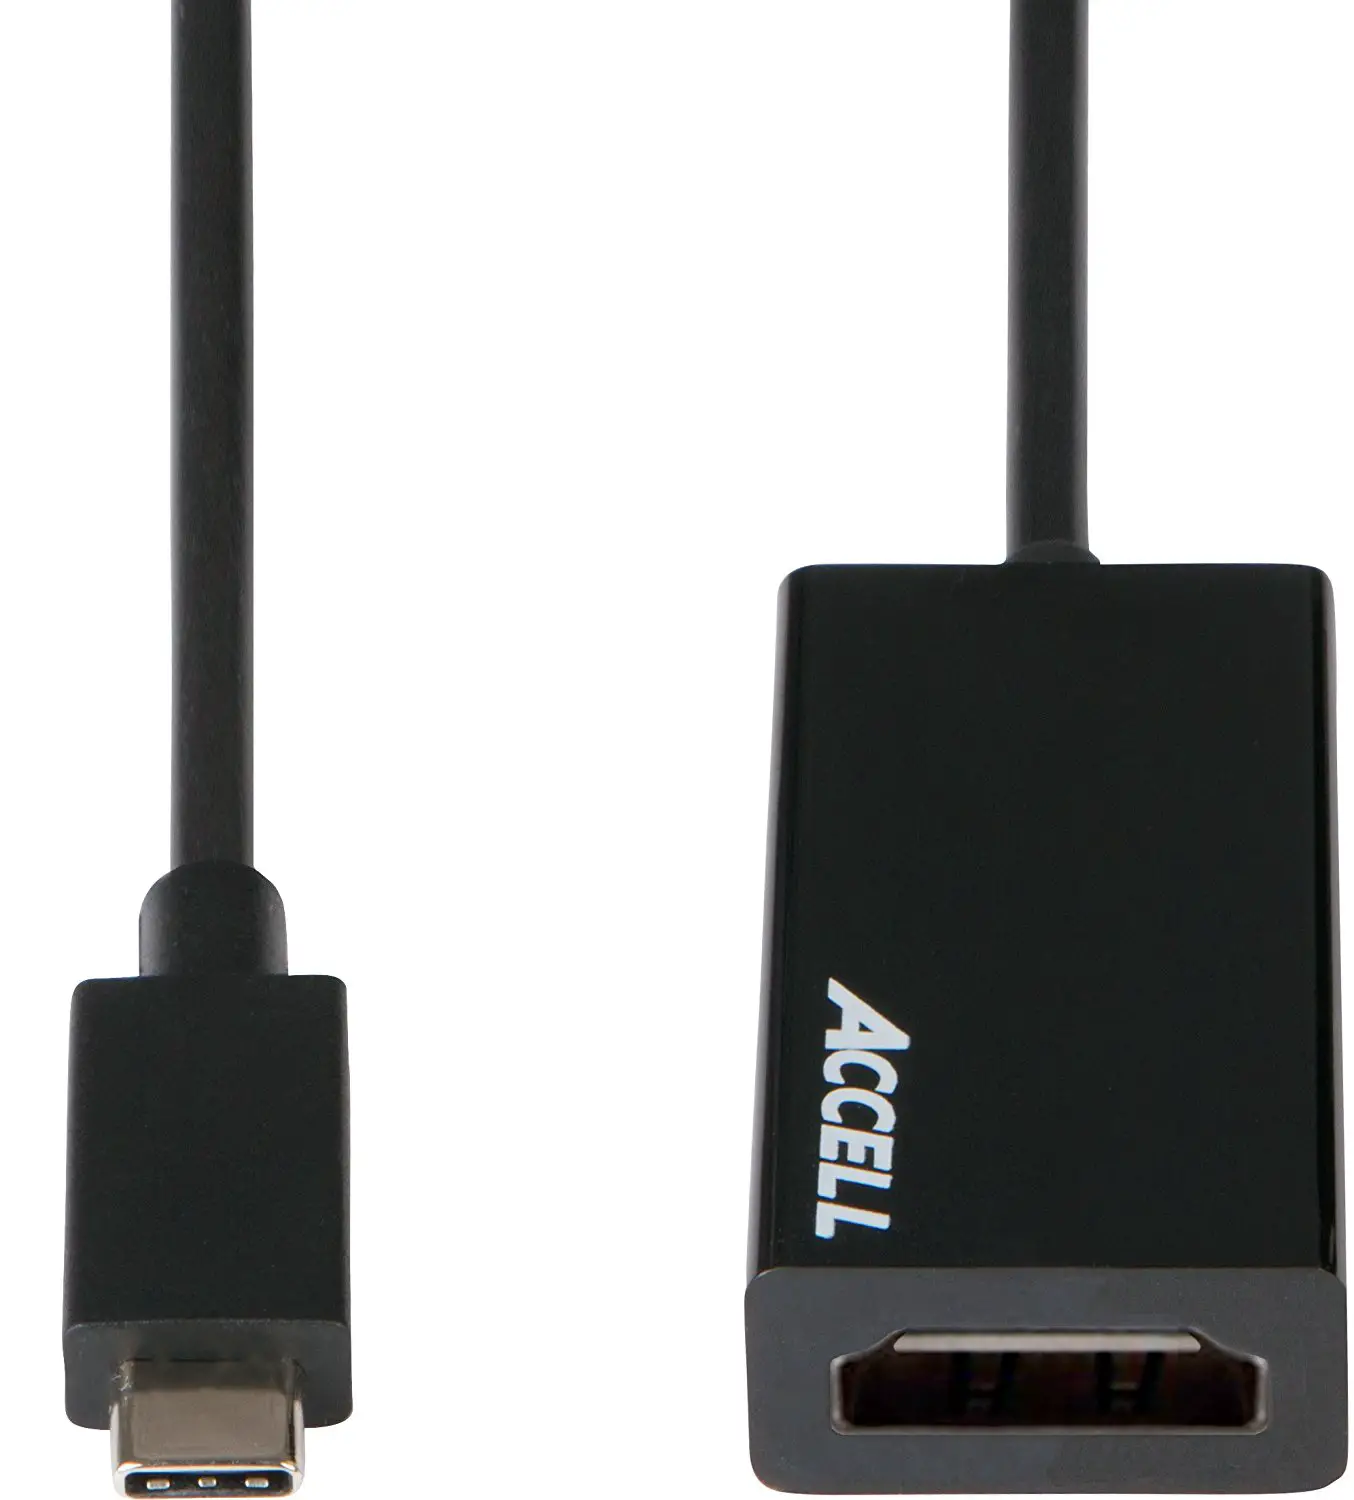 Accell USB-C to HDMI 2.0 Adapter review